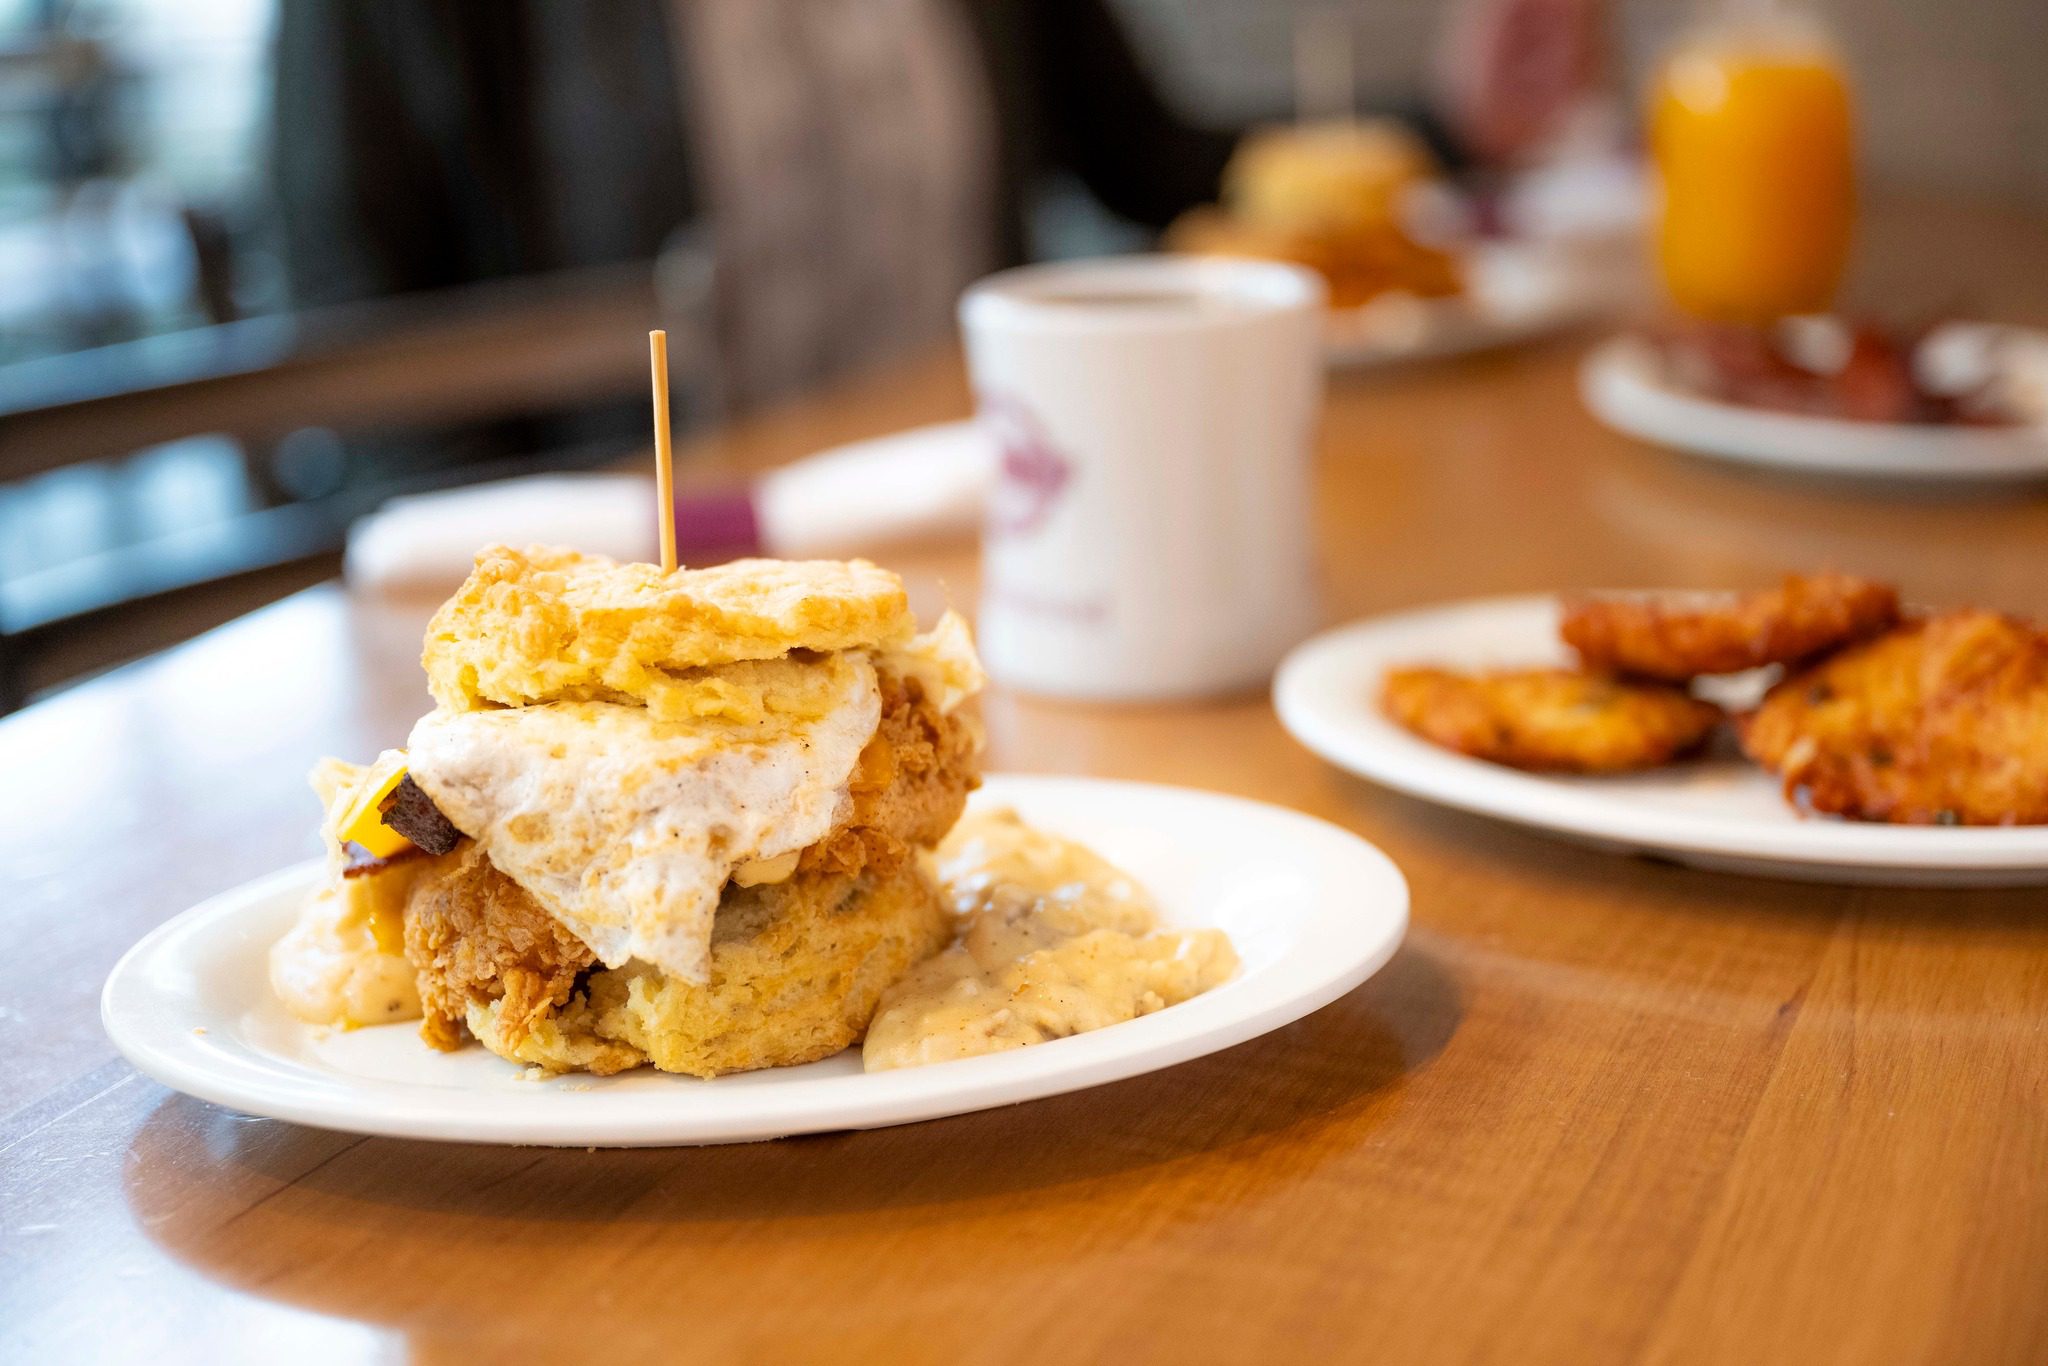 9 Items on Maple Street Biscuit Company's Menu That Will Have You Clutching Your Pearls